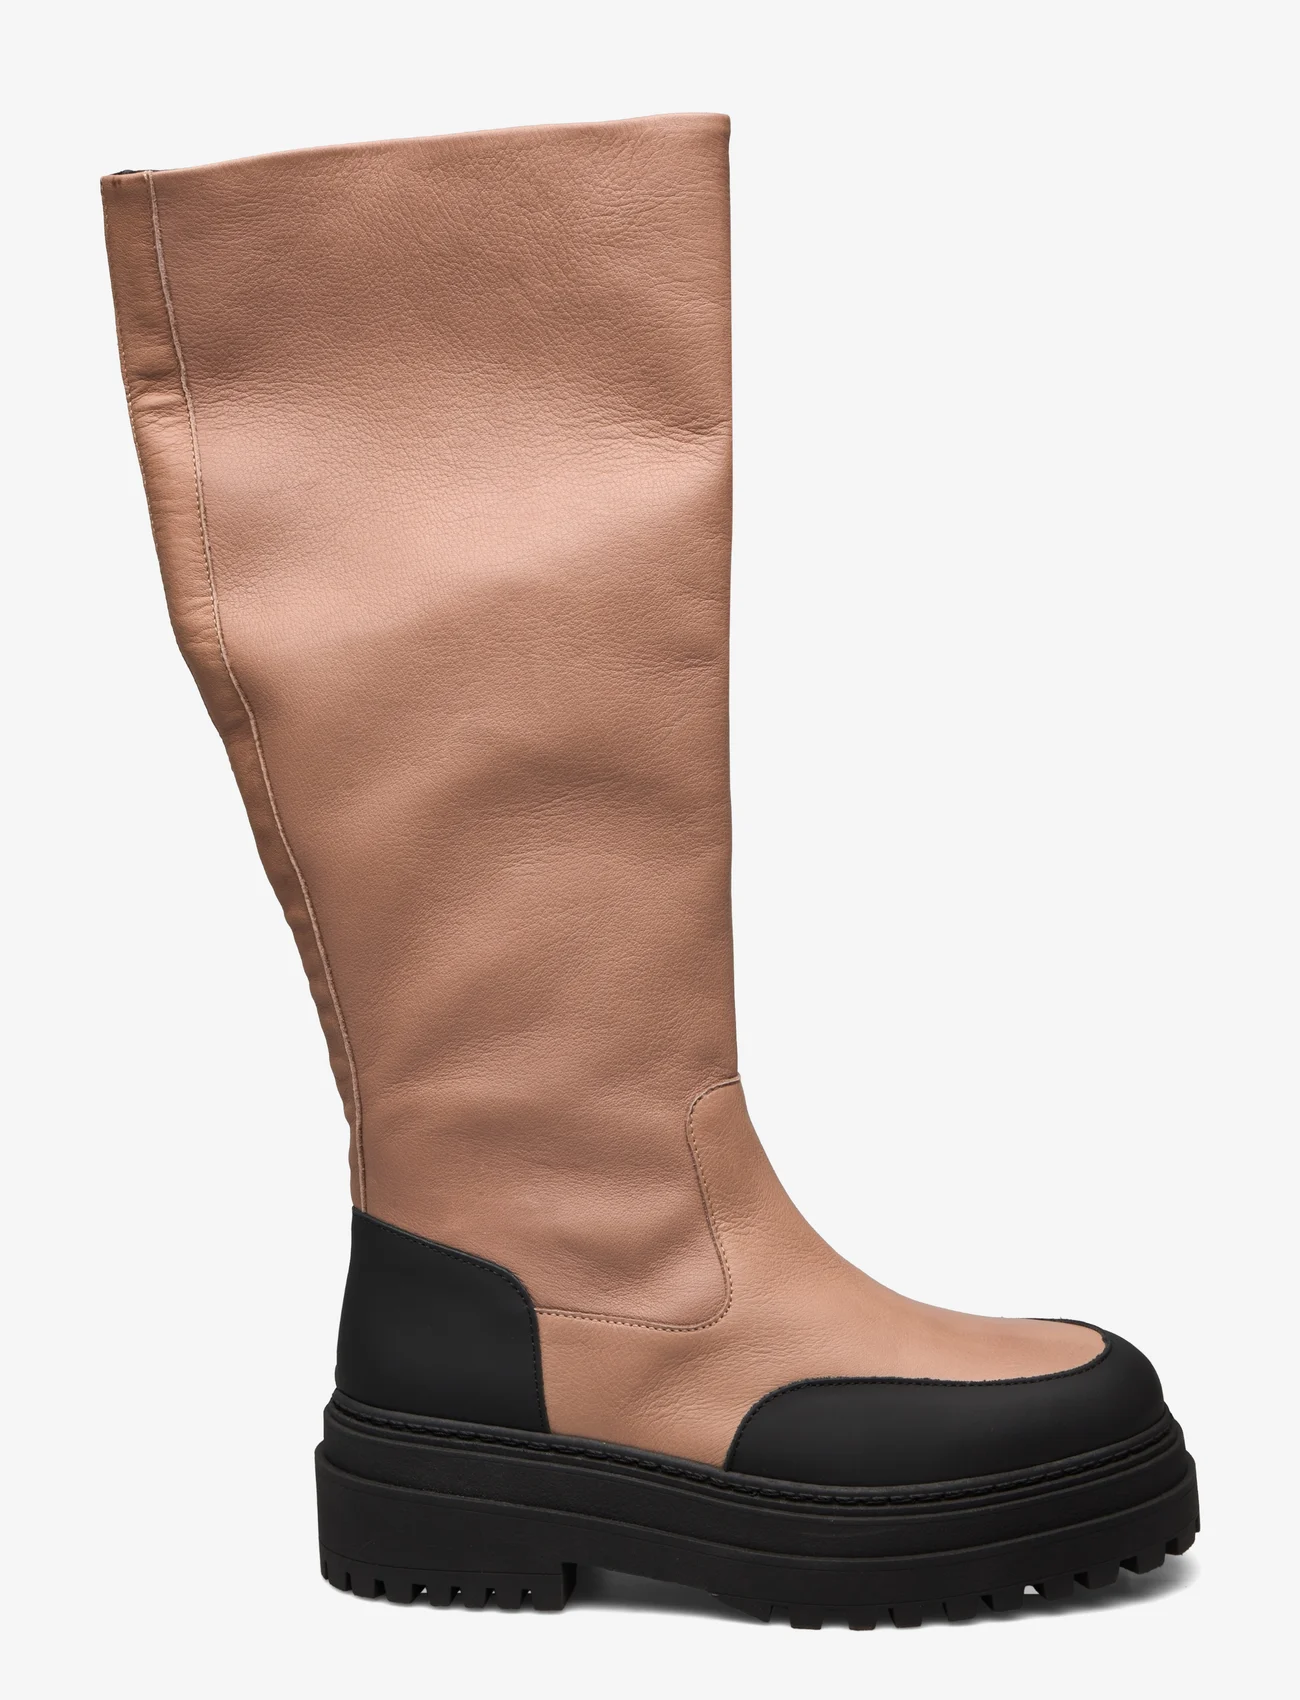 Selected Femme - SLFASTA NEW HIGH SHAFTED LEATHER BOOT B - pitkävartiset saappaat - warm taupe - 1